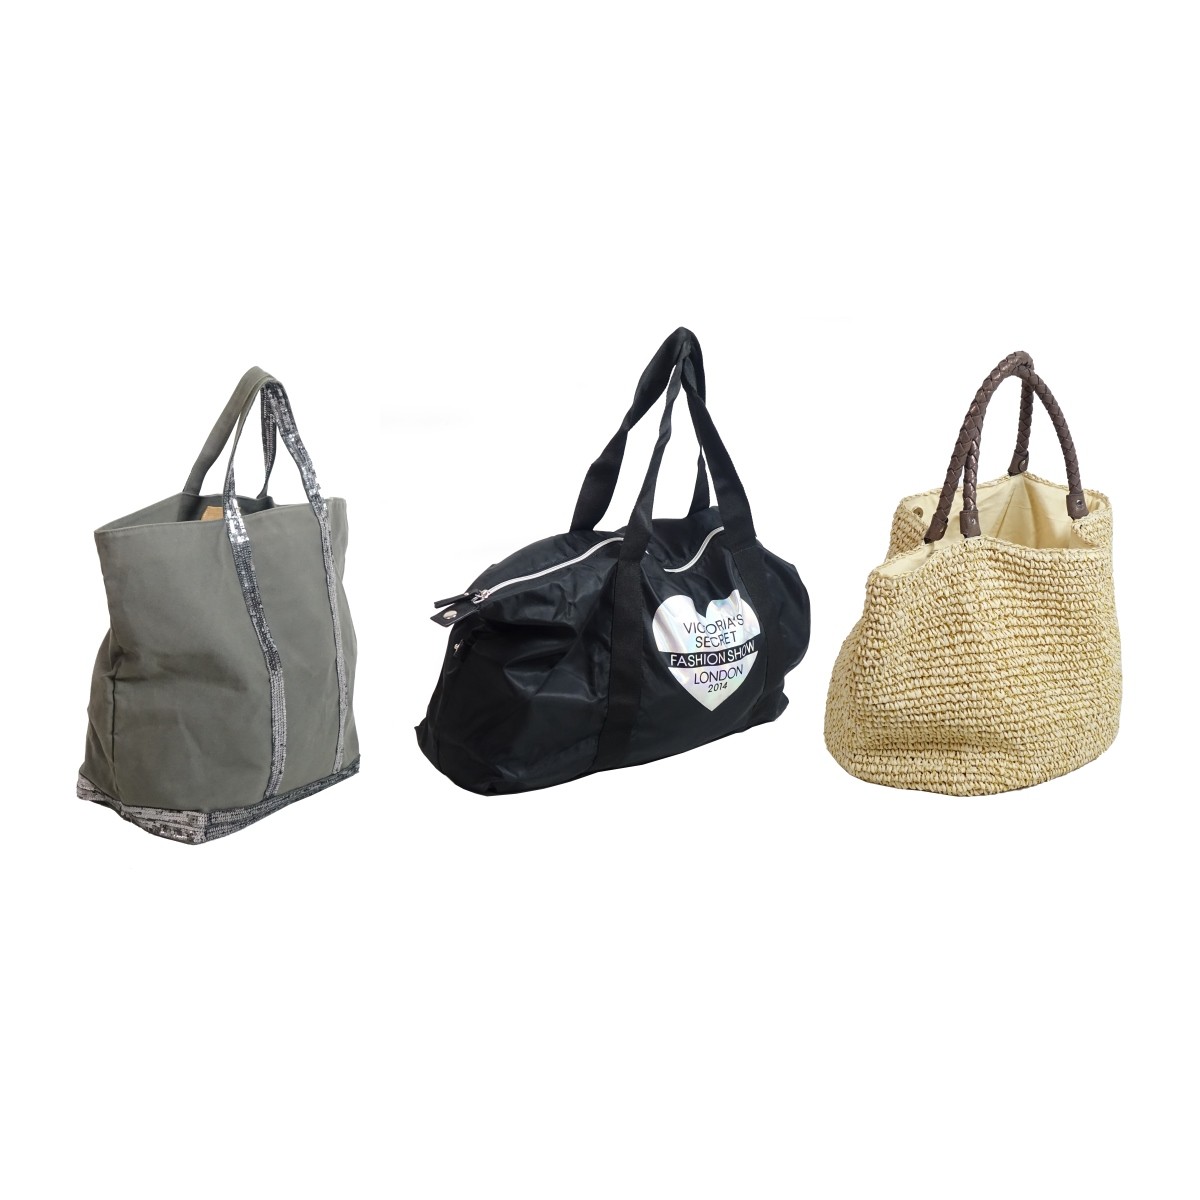 (3) Assorted Womens Tote Bags